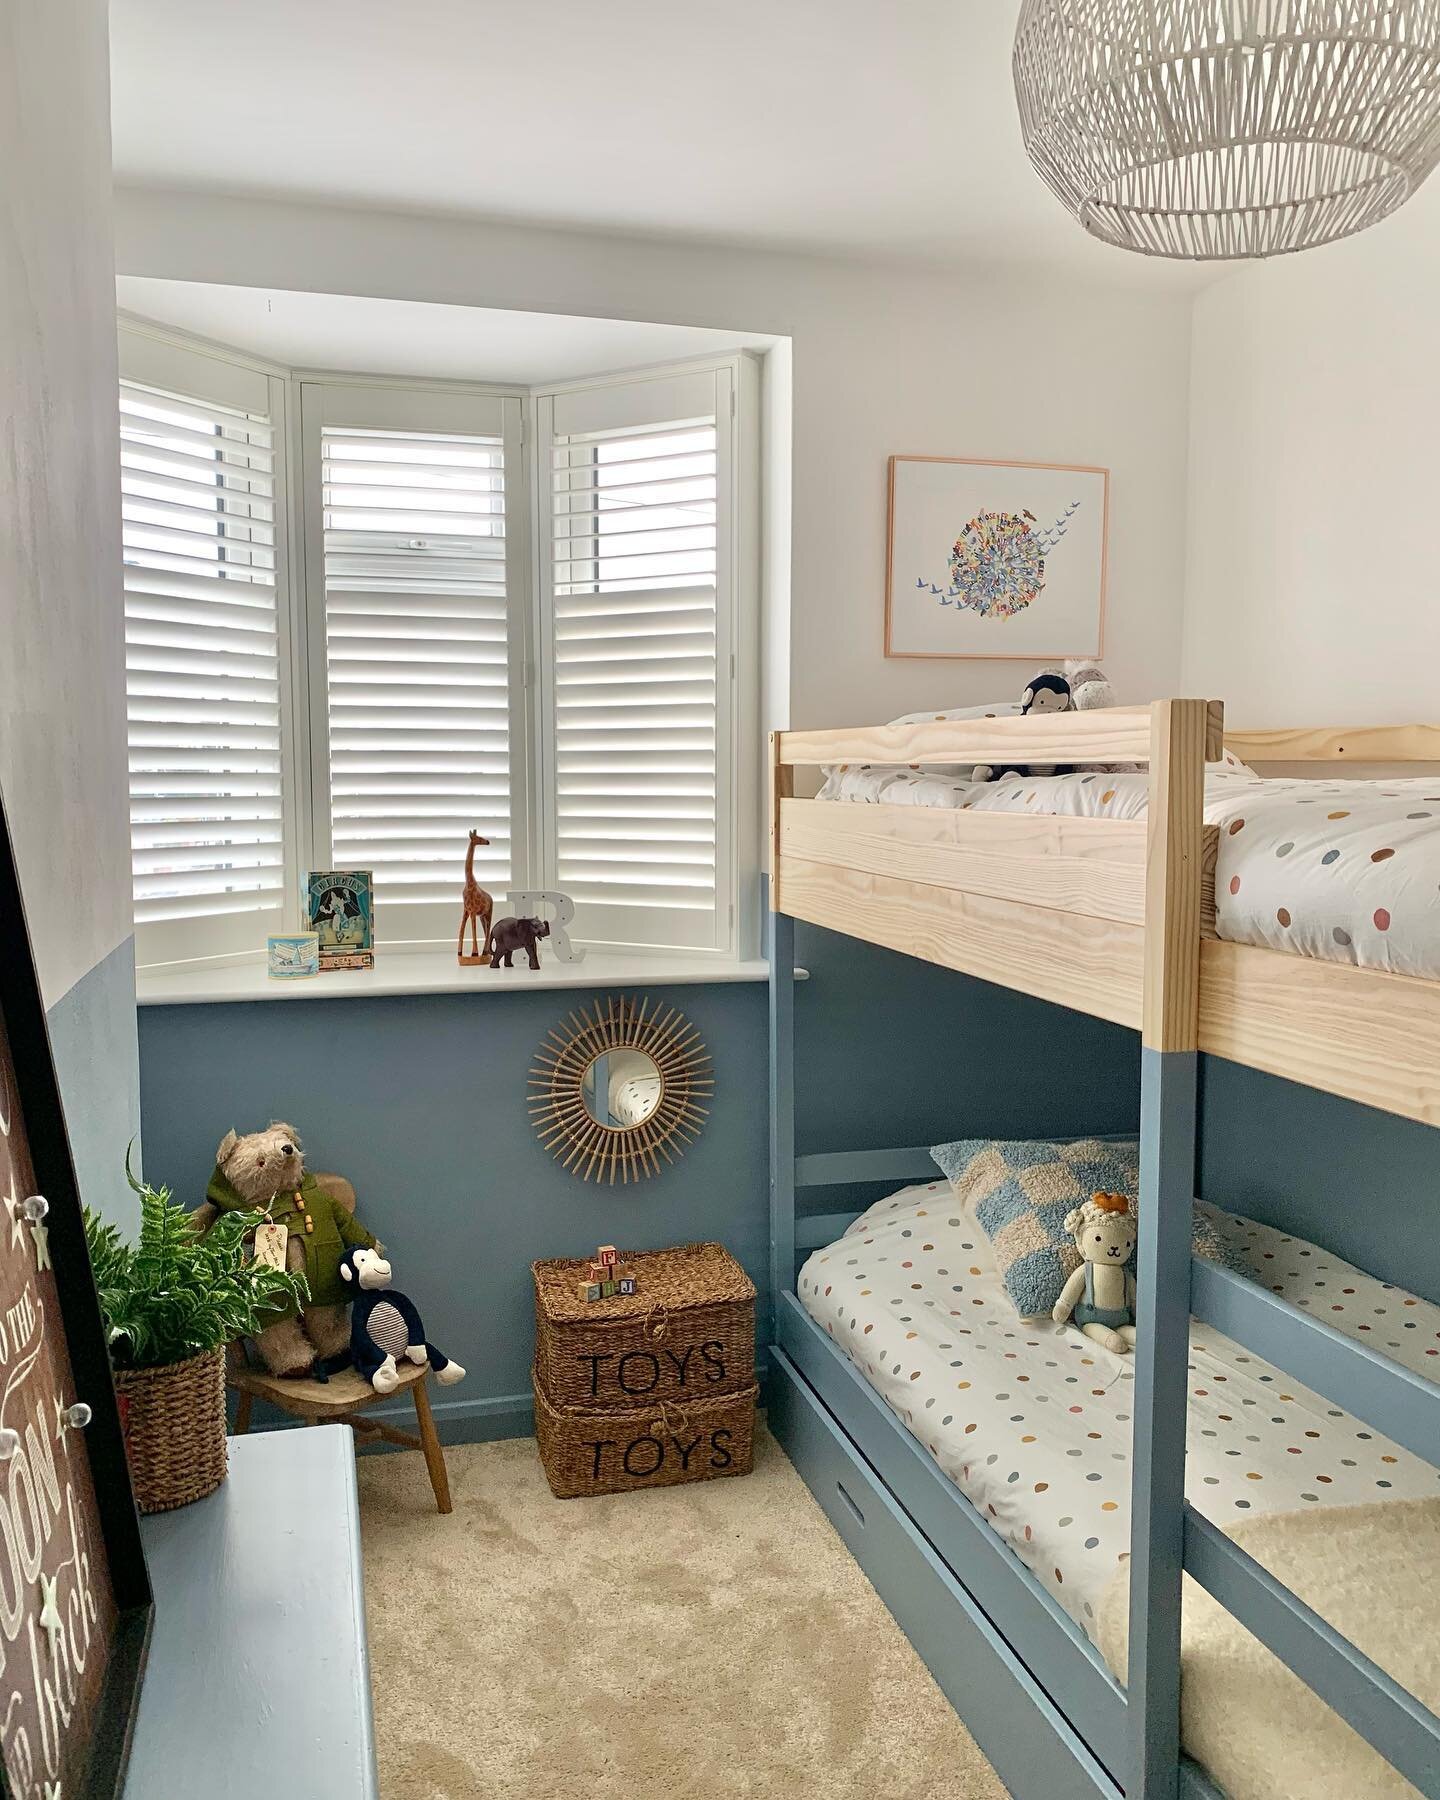 This bedroom is home to a five year old fire cracker, who was desperate for a big boys room, with bunk beds and blue walls.
The room might not be big but we wanted to make an impact and add interest without over powering the space. The paint we chose